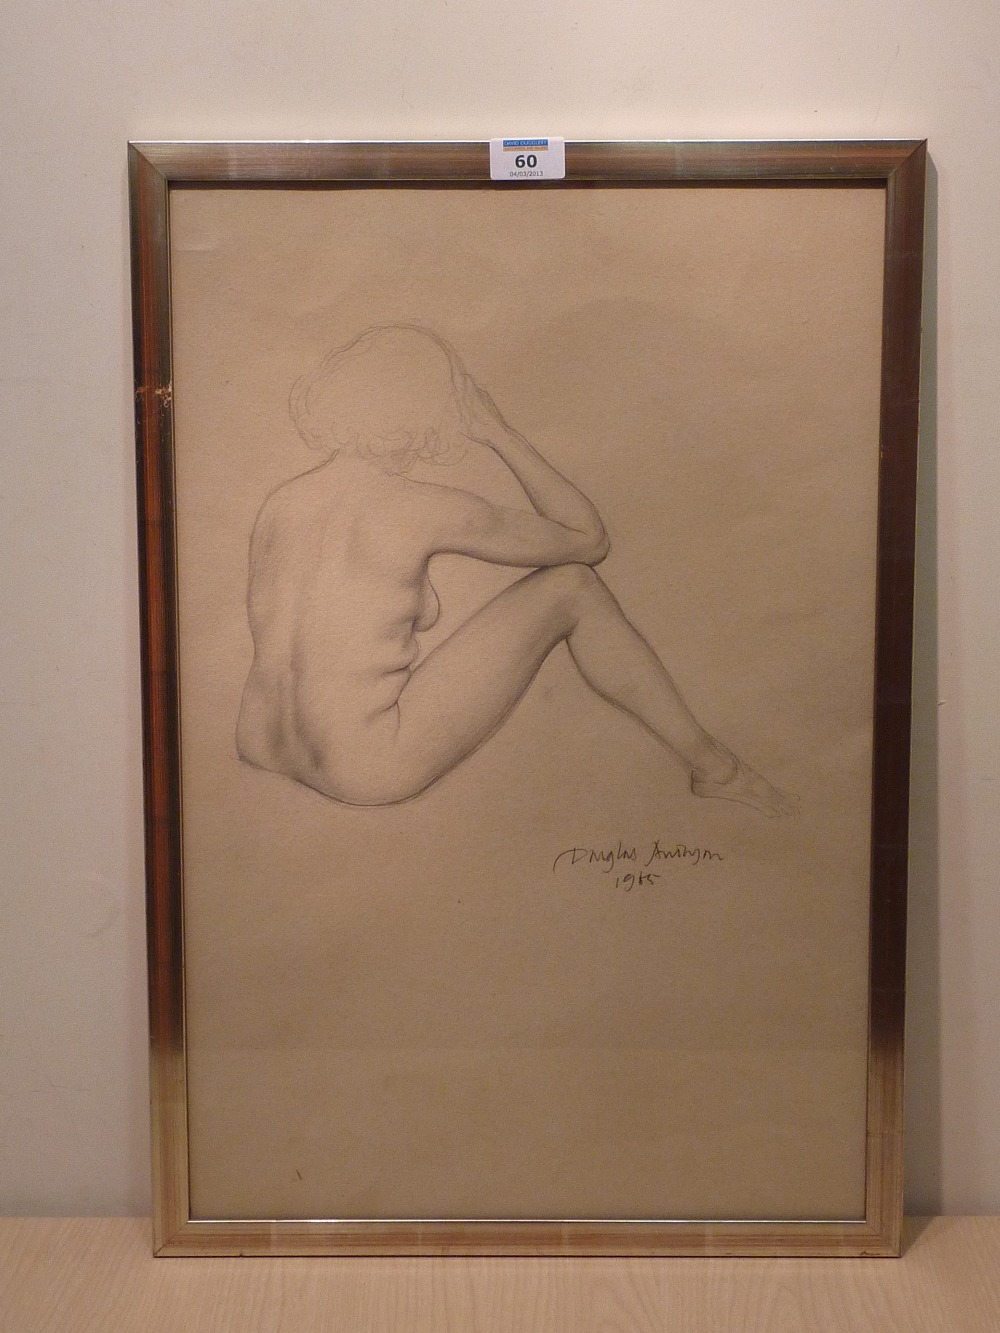 Douglas Anderson (1934-): Seated Female Nude, pencil signed and dated 1965,  56cm x 37cm

DDS -